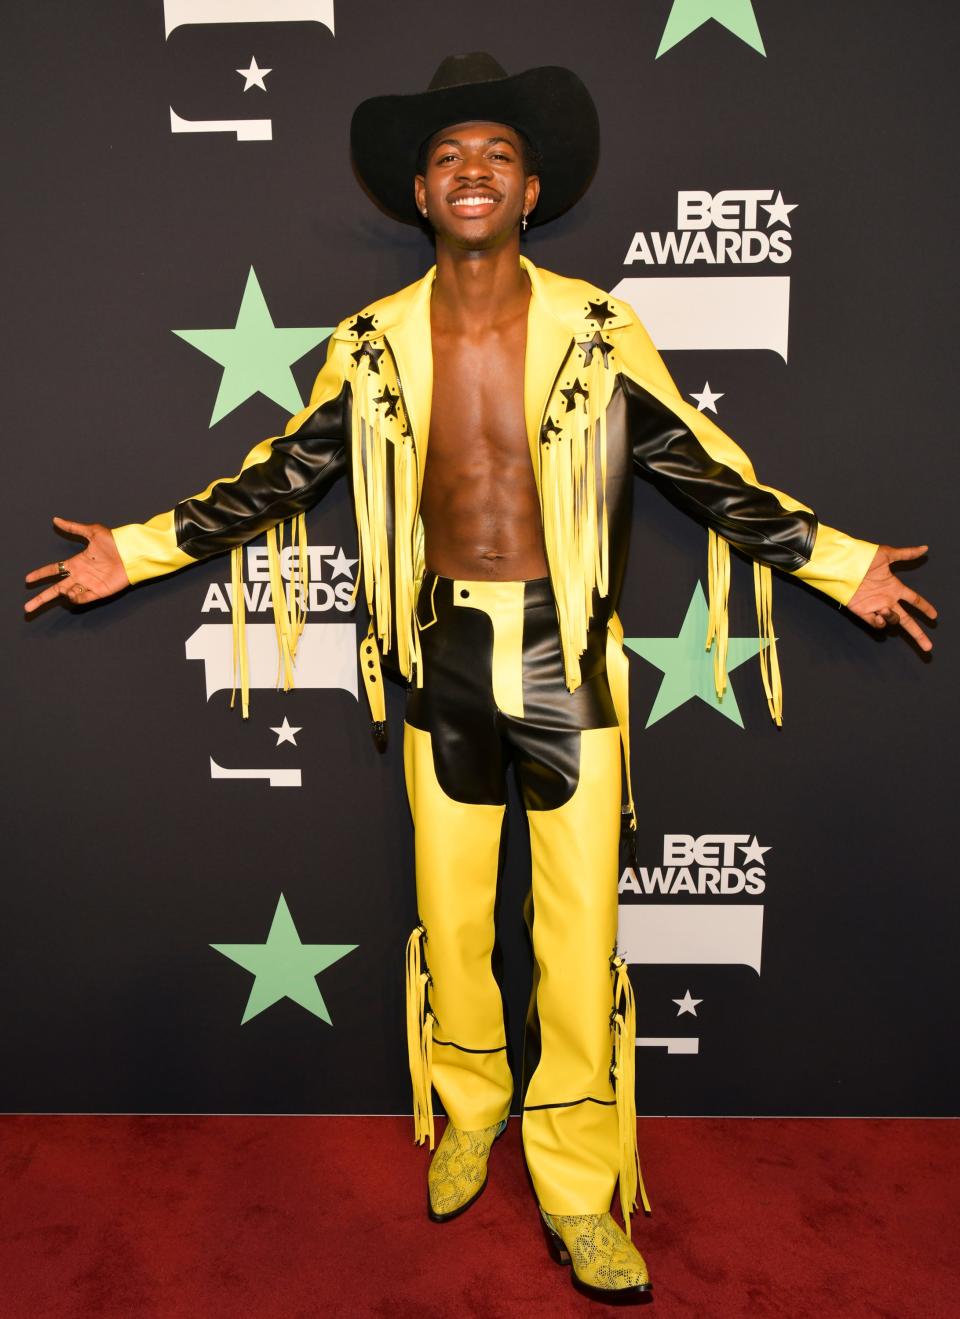 Lil Nas X poses for a portrait at the 2019 BET Awards.